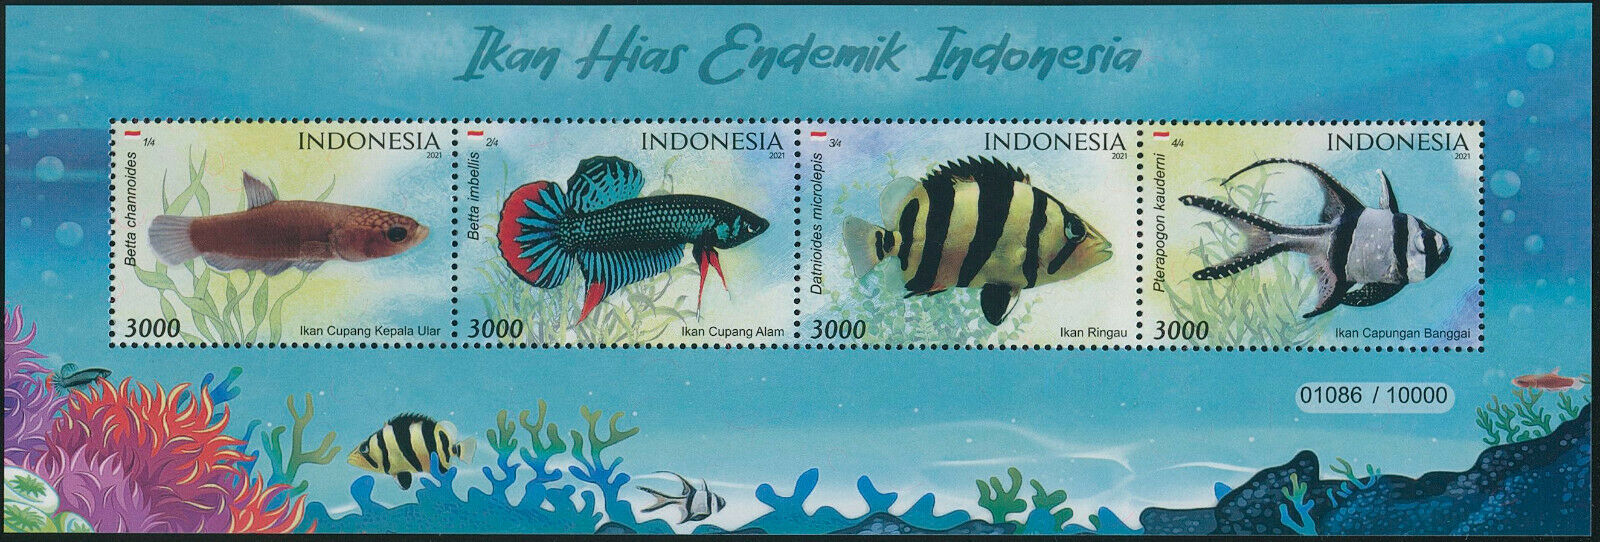 Indonesia 2021 MNH Fish Stamps Endemic Decorative Fishes Betta 4v M/S